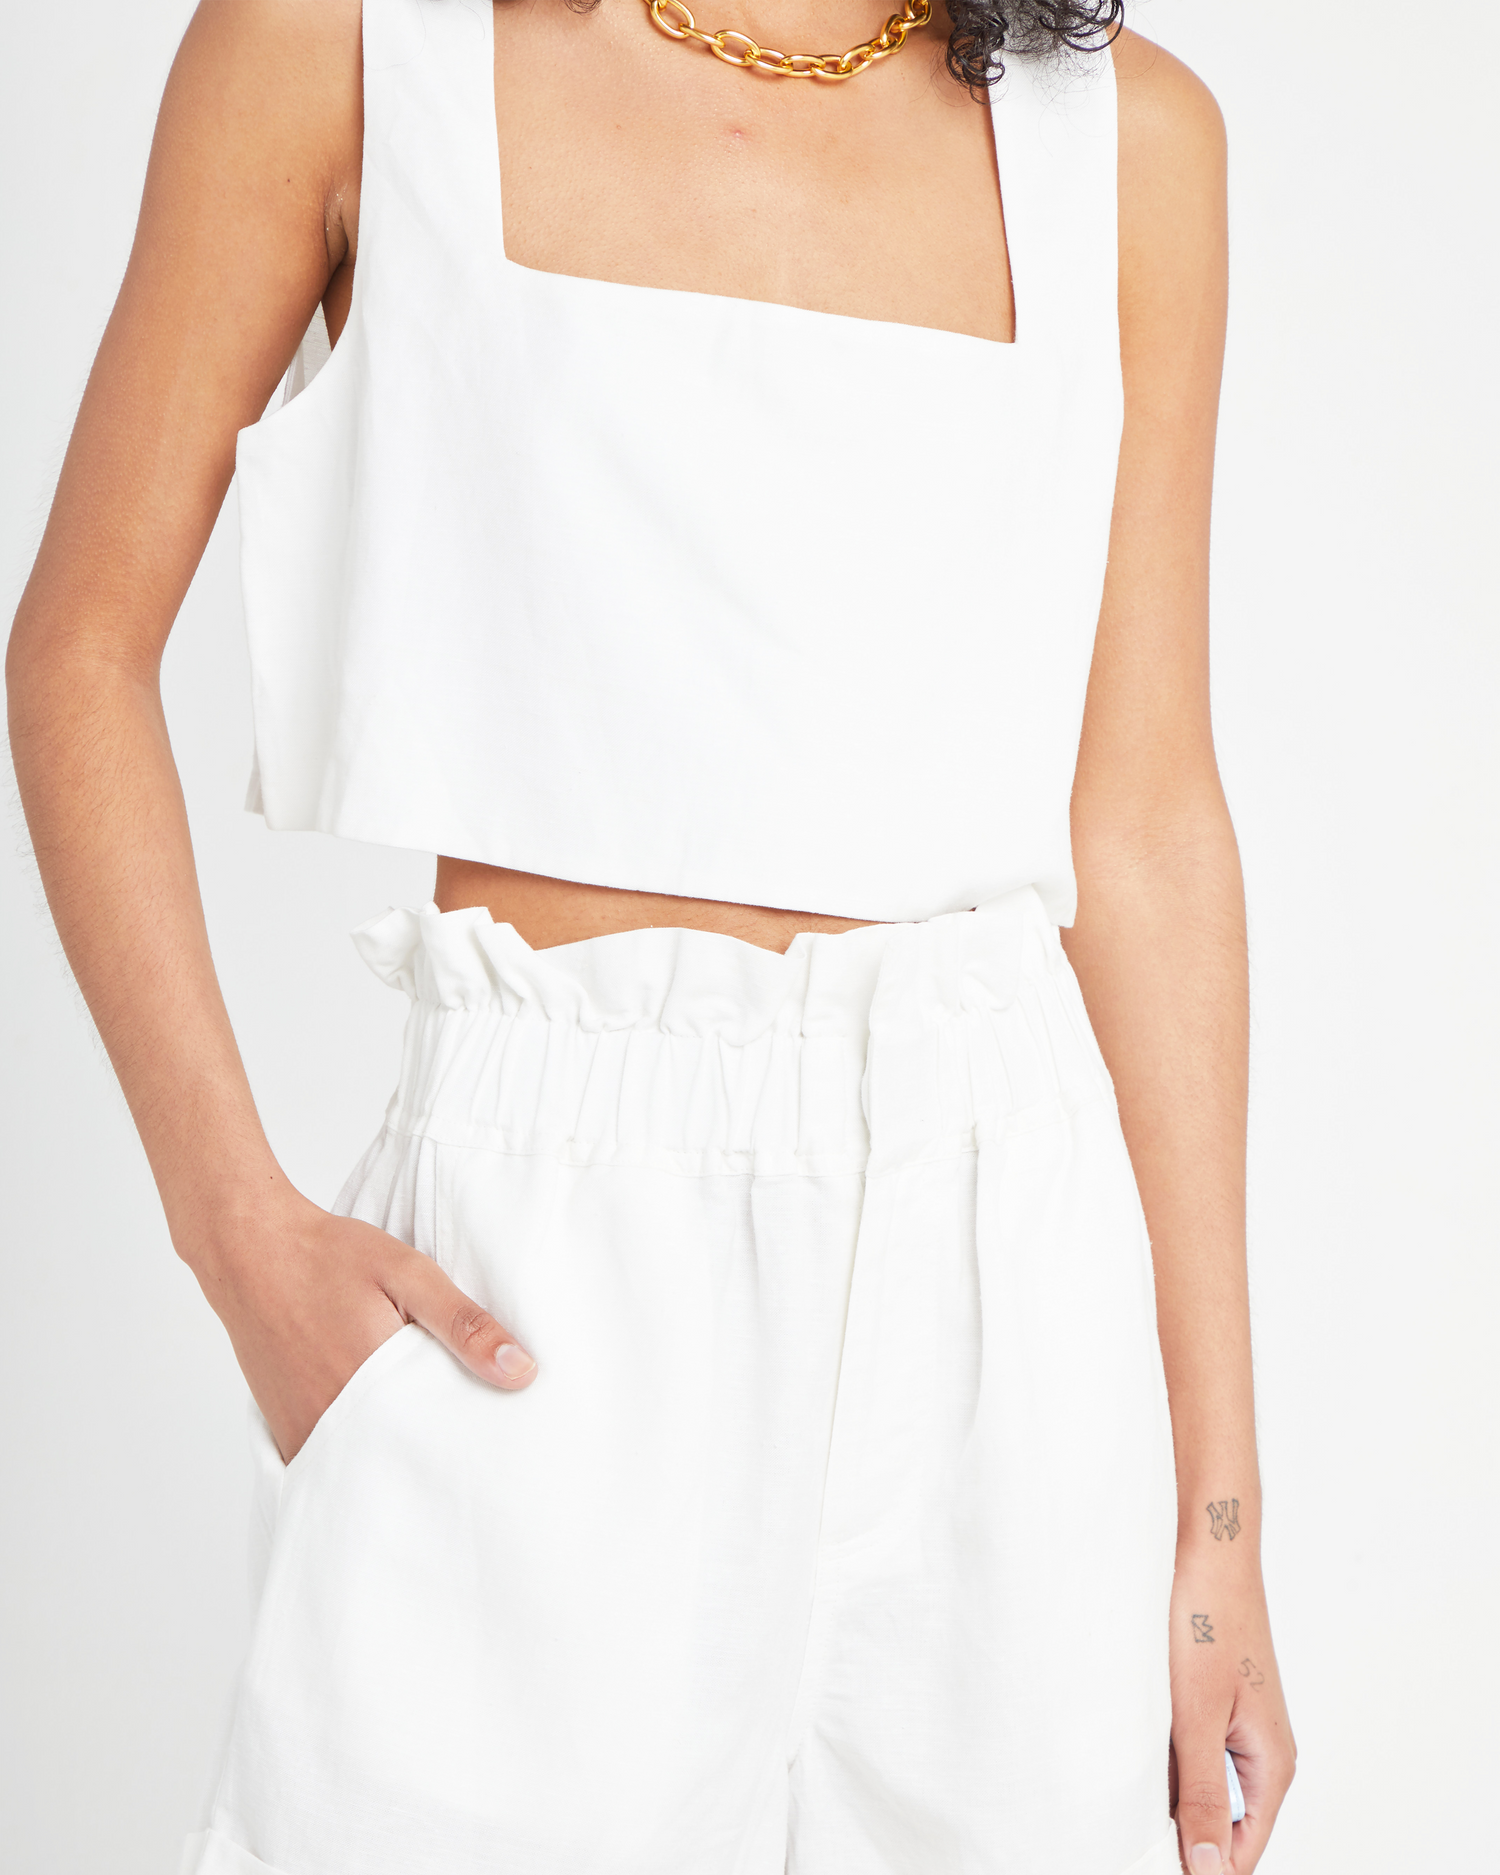 Sixth image of Vienna Set, a white top and shorts, linen, elastic, square neckline, pockets, tank